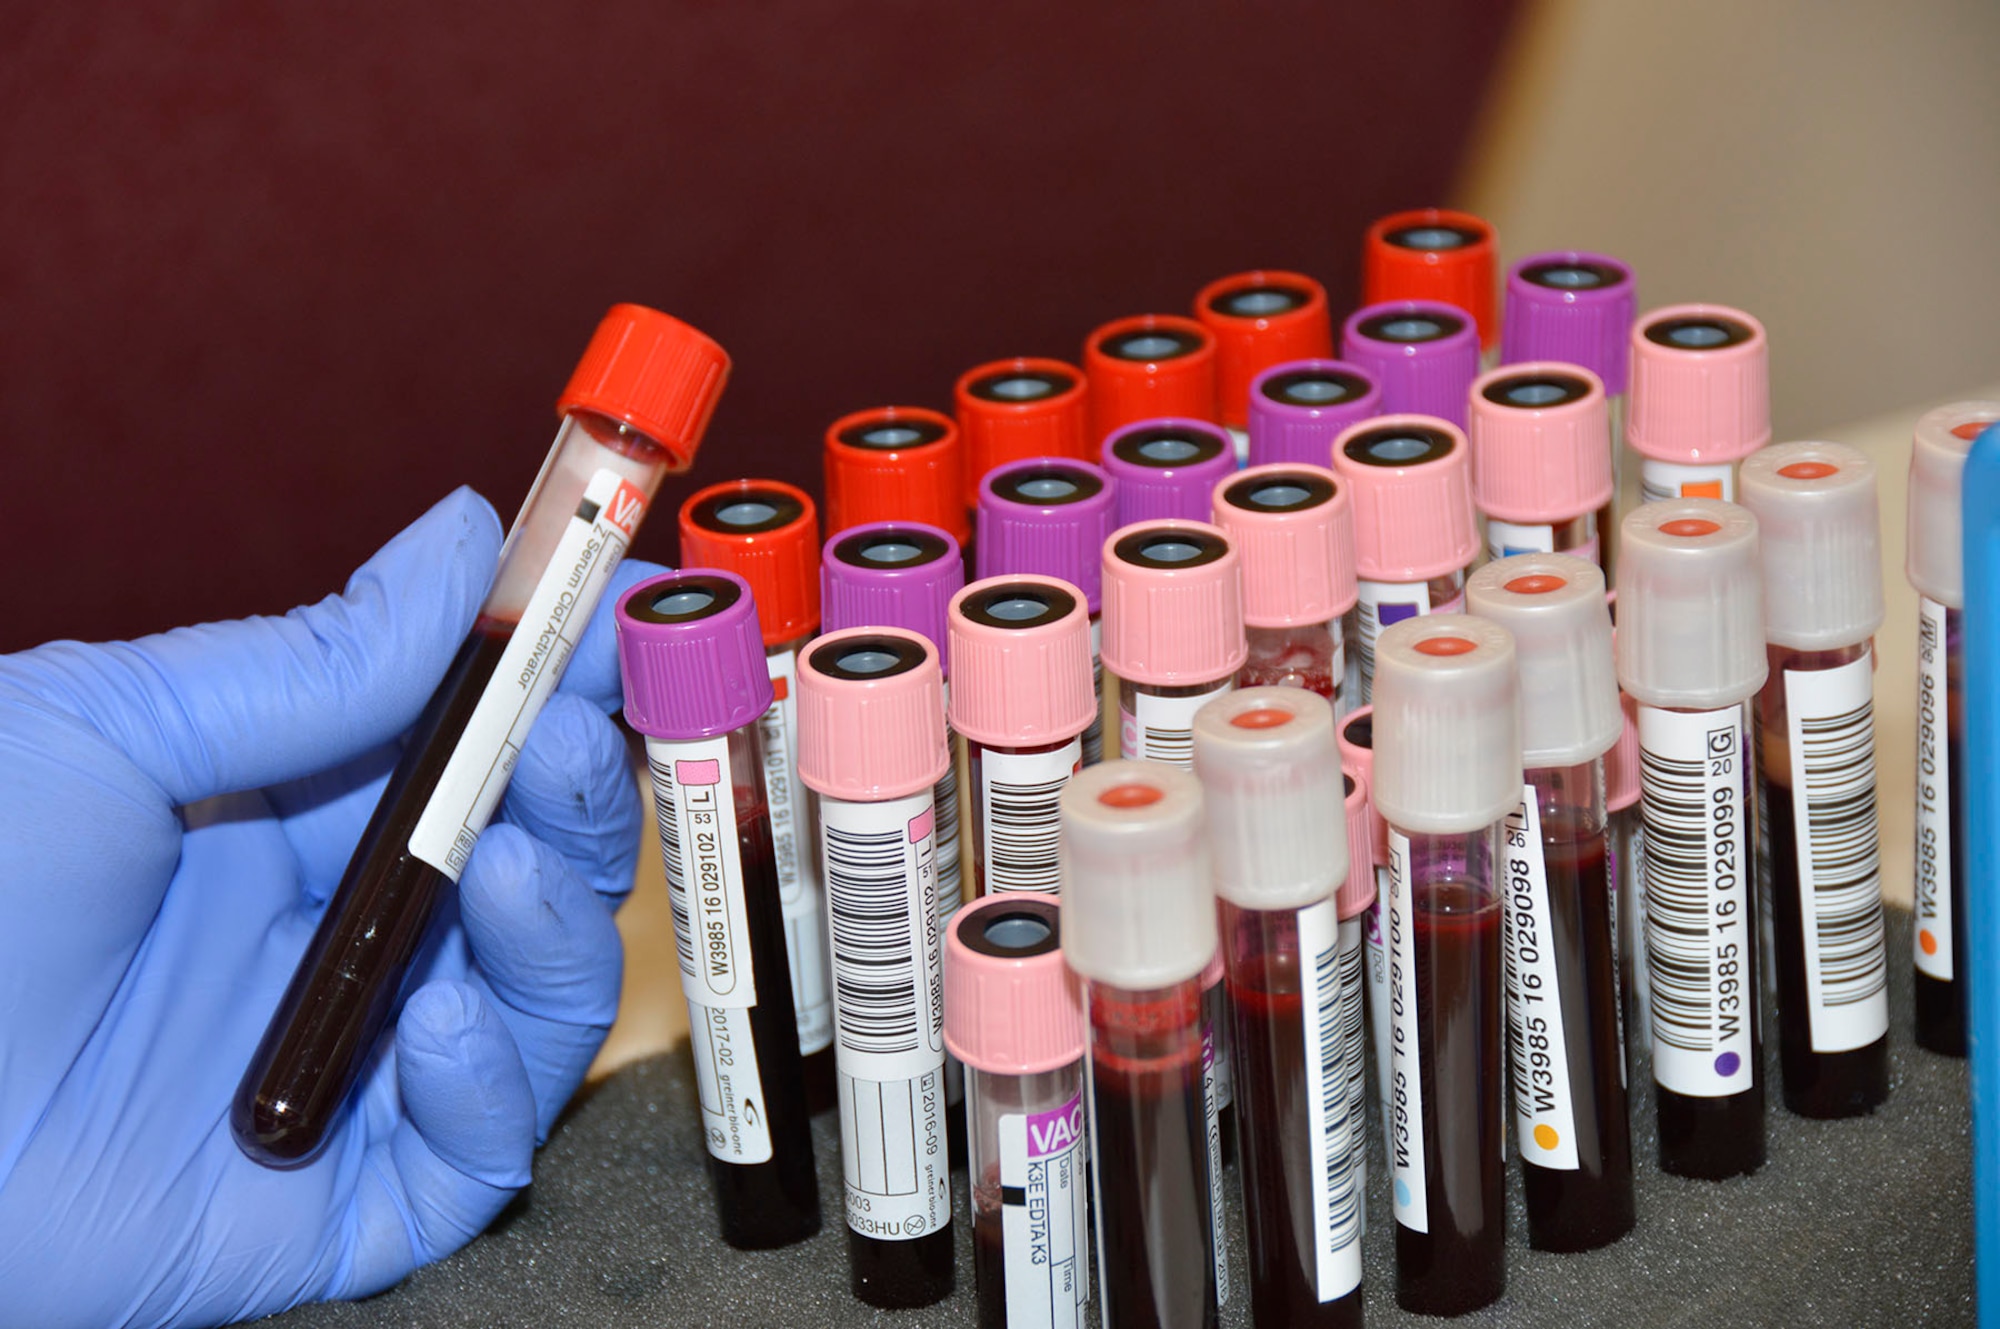 Vials of blood donated by Airmen from the 145th Airlift Wing wait to be tested by Community Blood Center of the Carolinas. Over a dozen tests are performed on each vial including establishing blood types. The blood collected during the blood drive held on April 9, 2016 at the North Carolina Air National Guard Base, Charlotte Douglas International Airport, helps patients within the local community. Donating one pint takes an hour or less, and in the end one walks away having saved up to three lives. (U.S. Air National Guard photo by Master Sgt. Patricia F. Moran/Released)